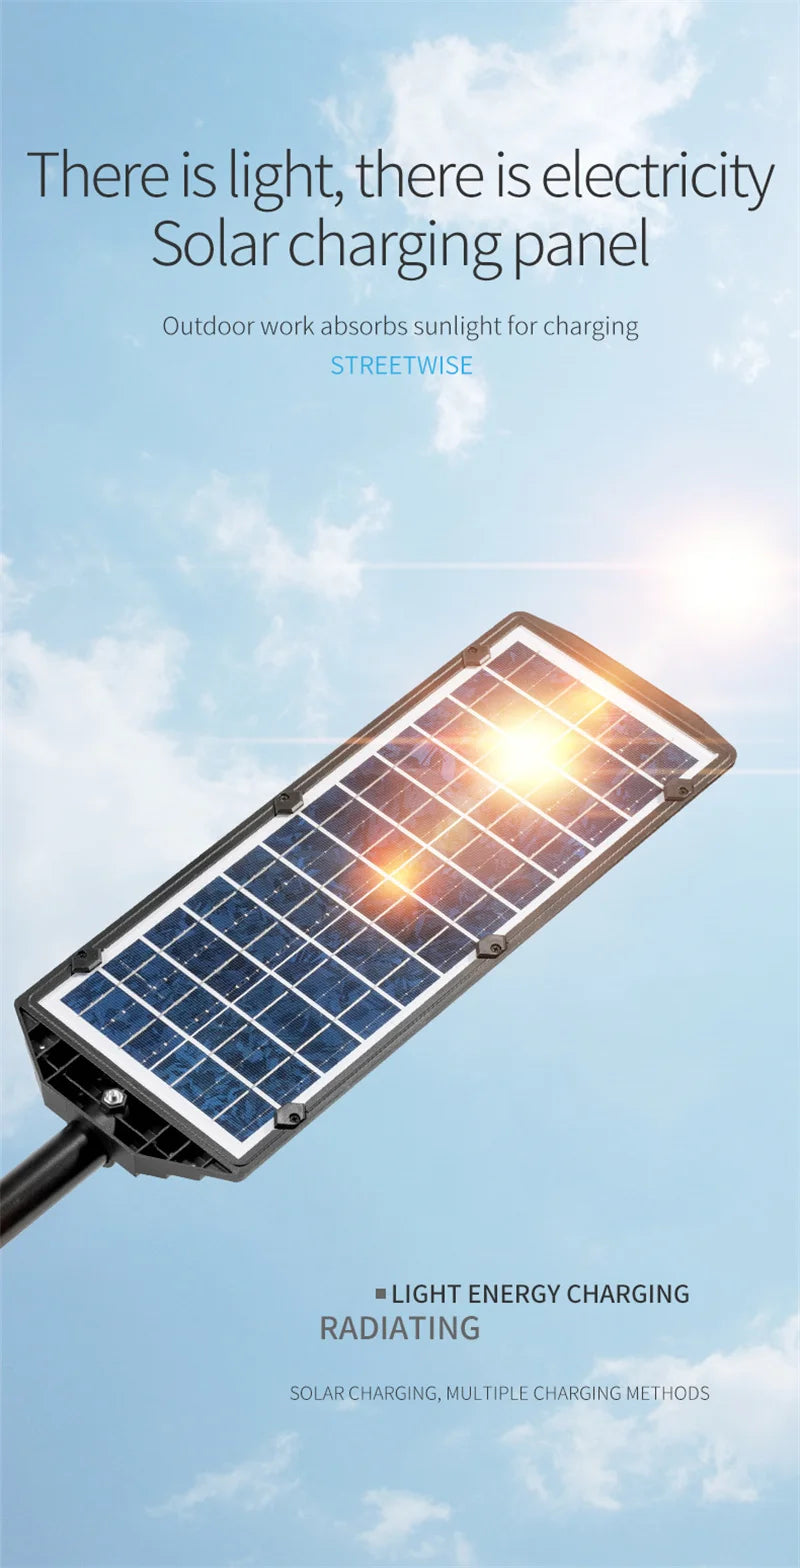 15000LM Solar Street Light, Solar-powered street light charges during the day, converting sunlight to power at night with reliable multiple charging methods.